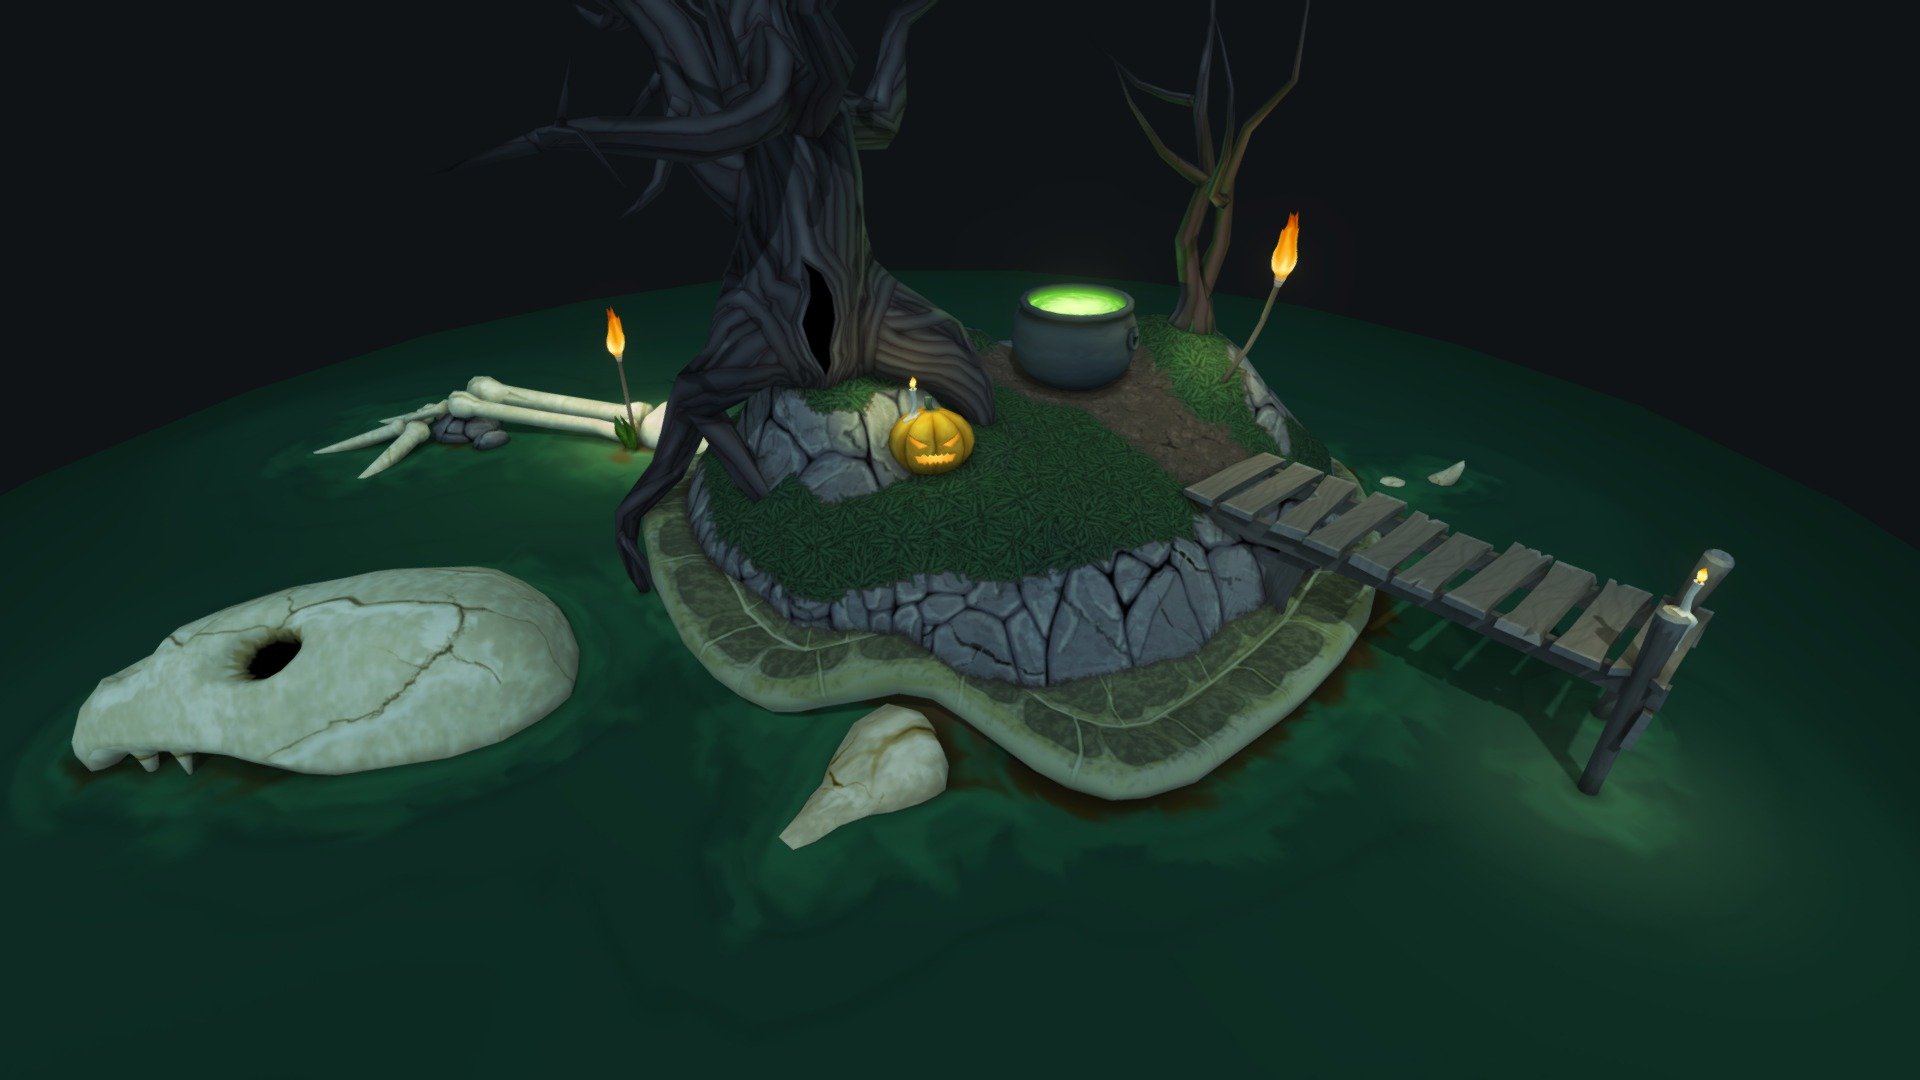 Final version of my entry for the Unity Island Contest  
Blog about my entry: http://www.xwiredgames.com/wp/turtle-power/  
Contest Thread: https://forum.unity.com/threads/unity-community-art-challenge-october-2014-the-island.271787/ - Turtle Island - Island Contest - 3D model by Phil_XG 3d model